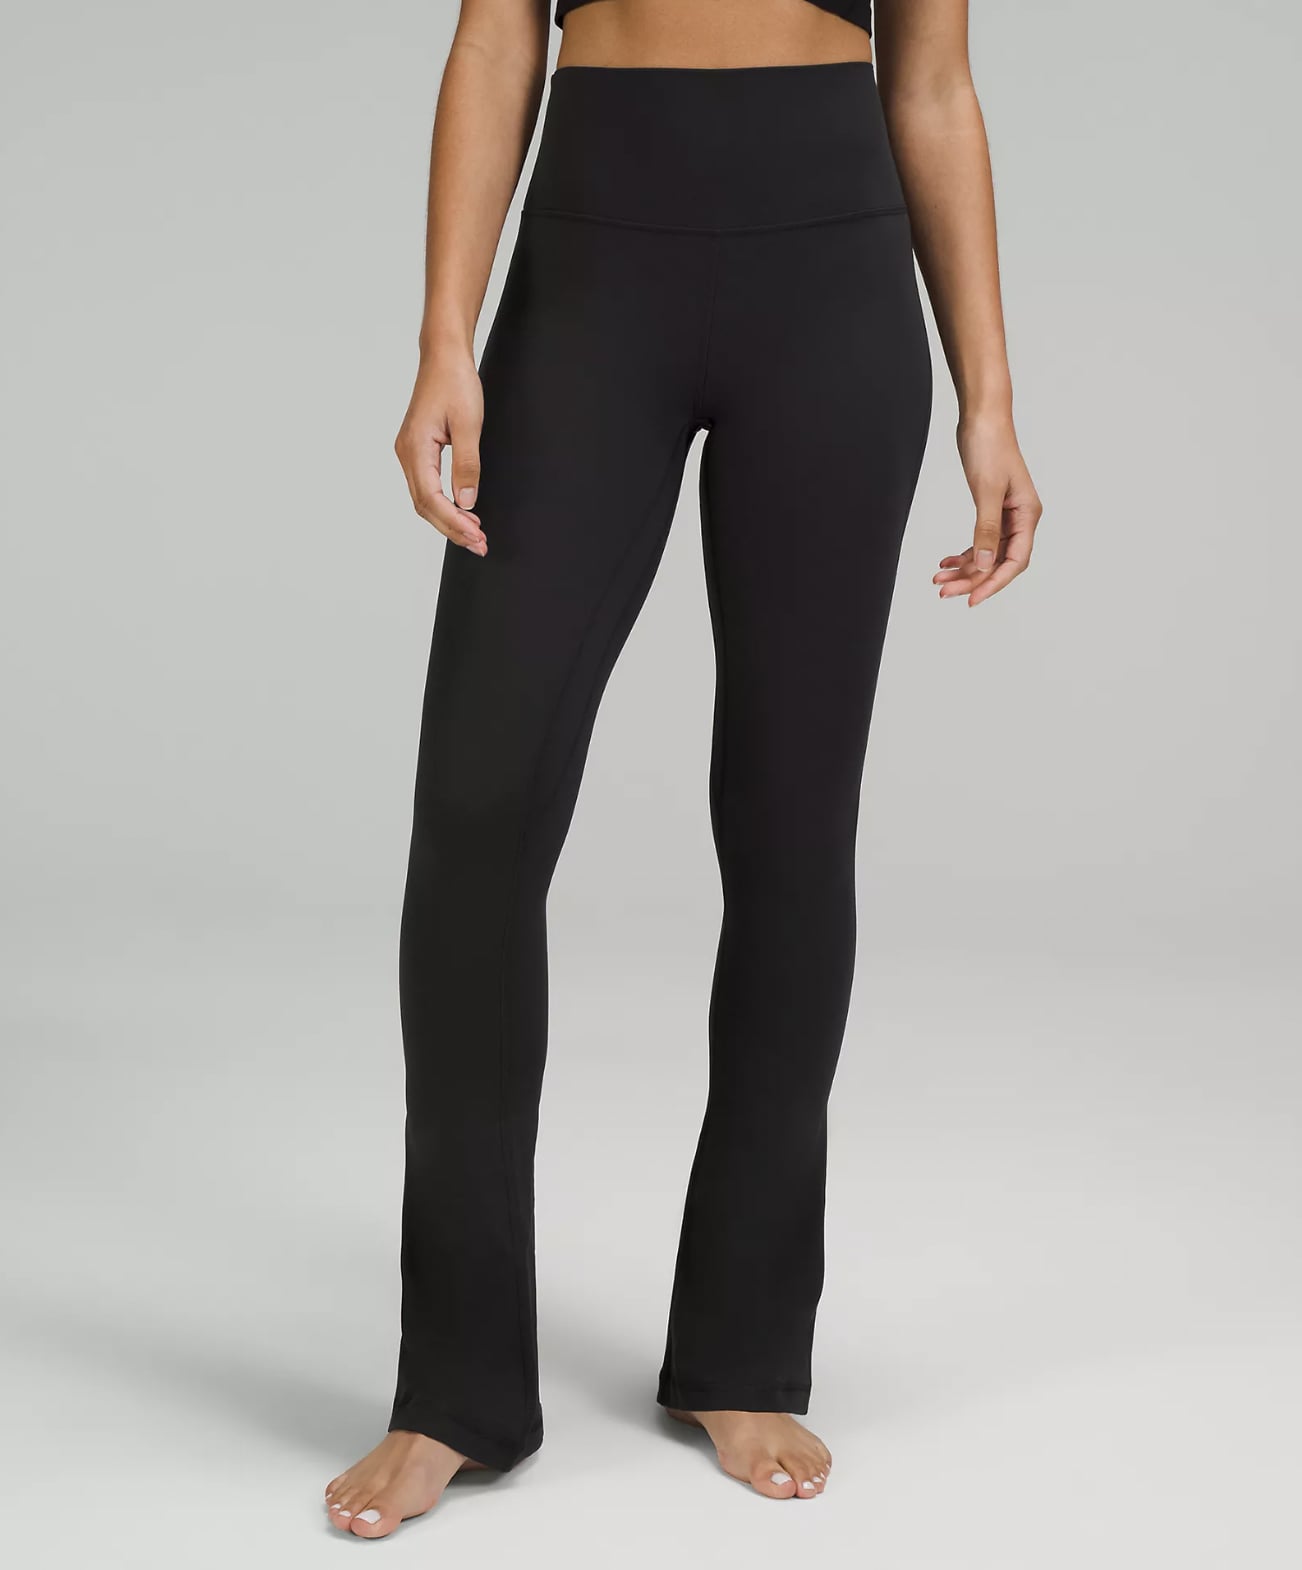 We Compared 12 of the Best Lululemon Leggings, So You Know Exactly What ...